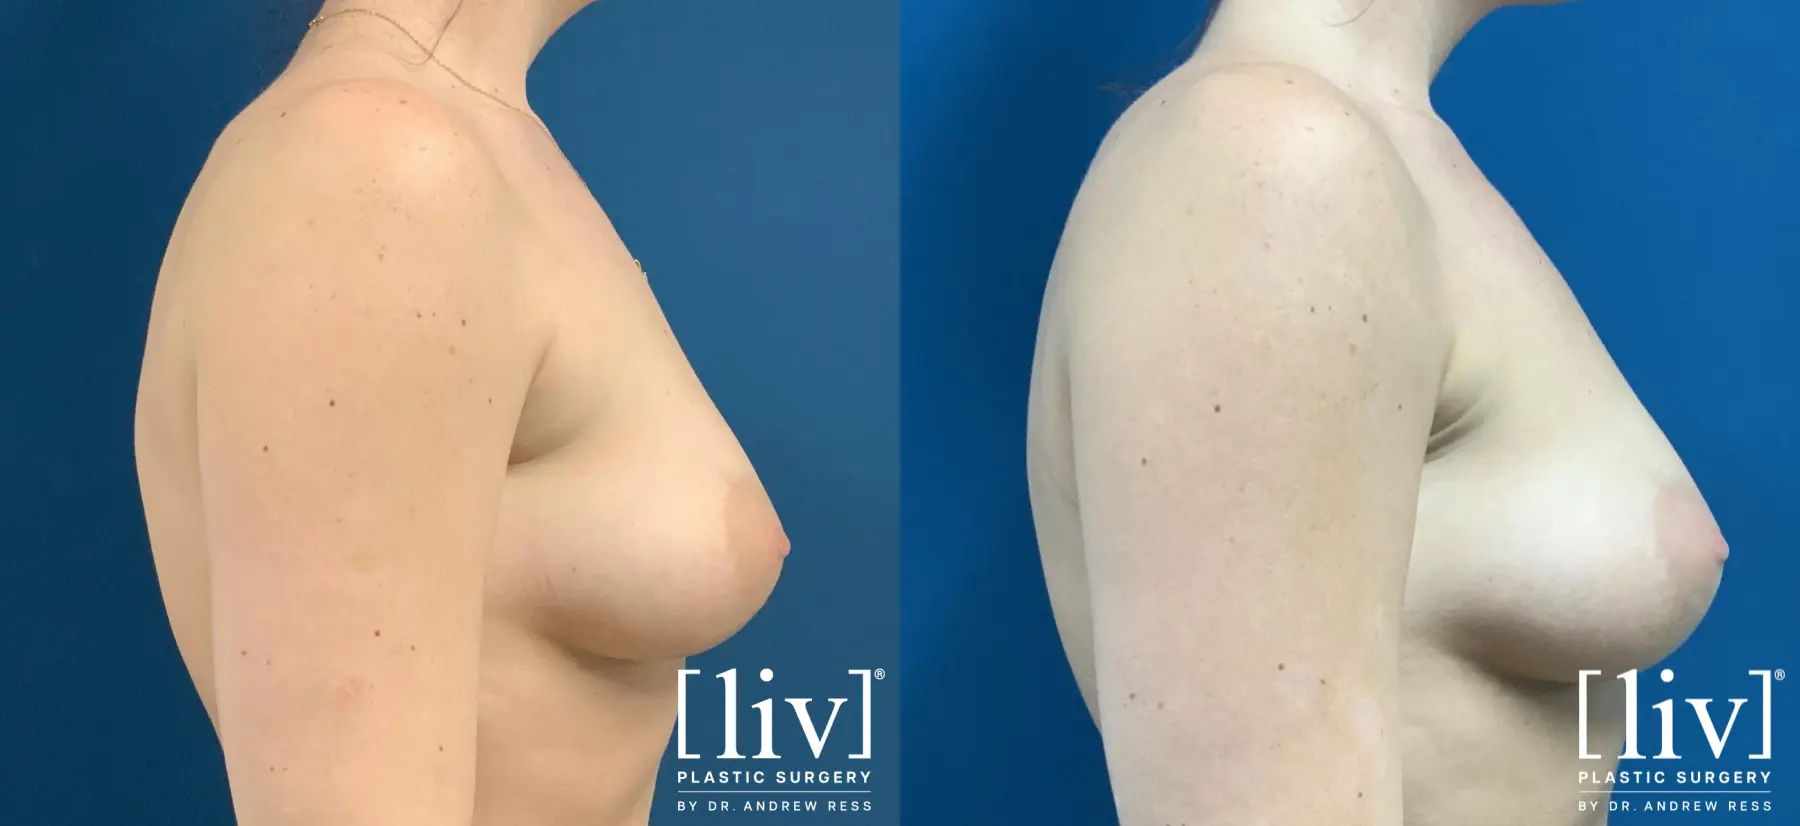 Bra-Fat Liposuction - Before and After 3